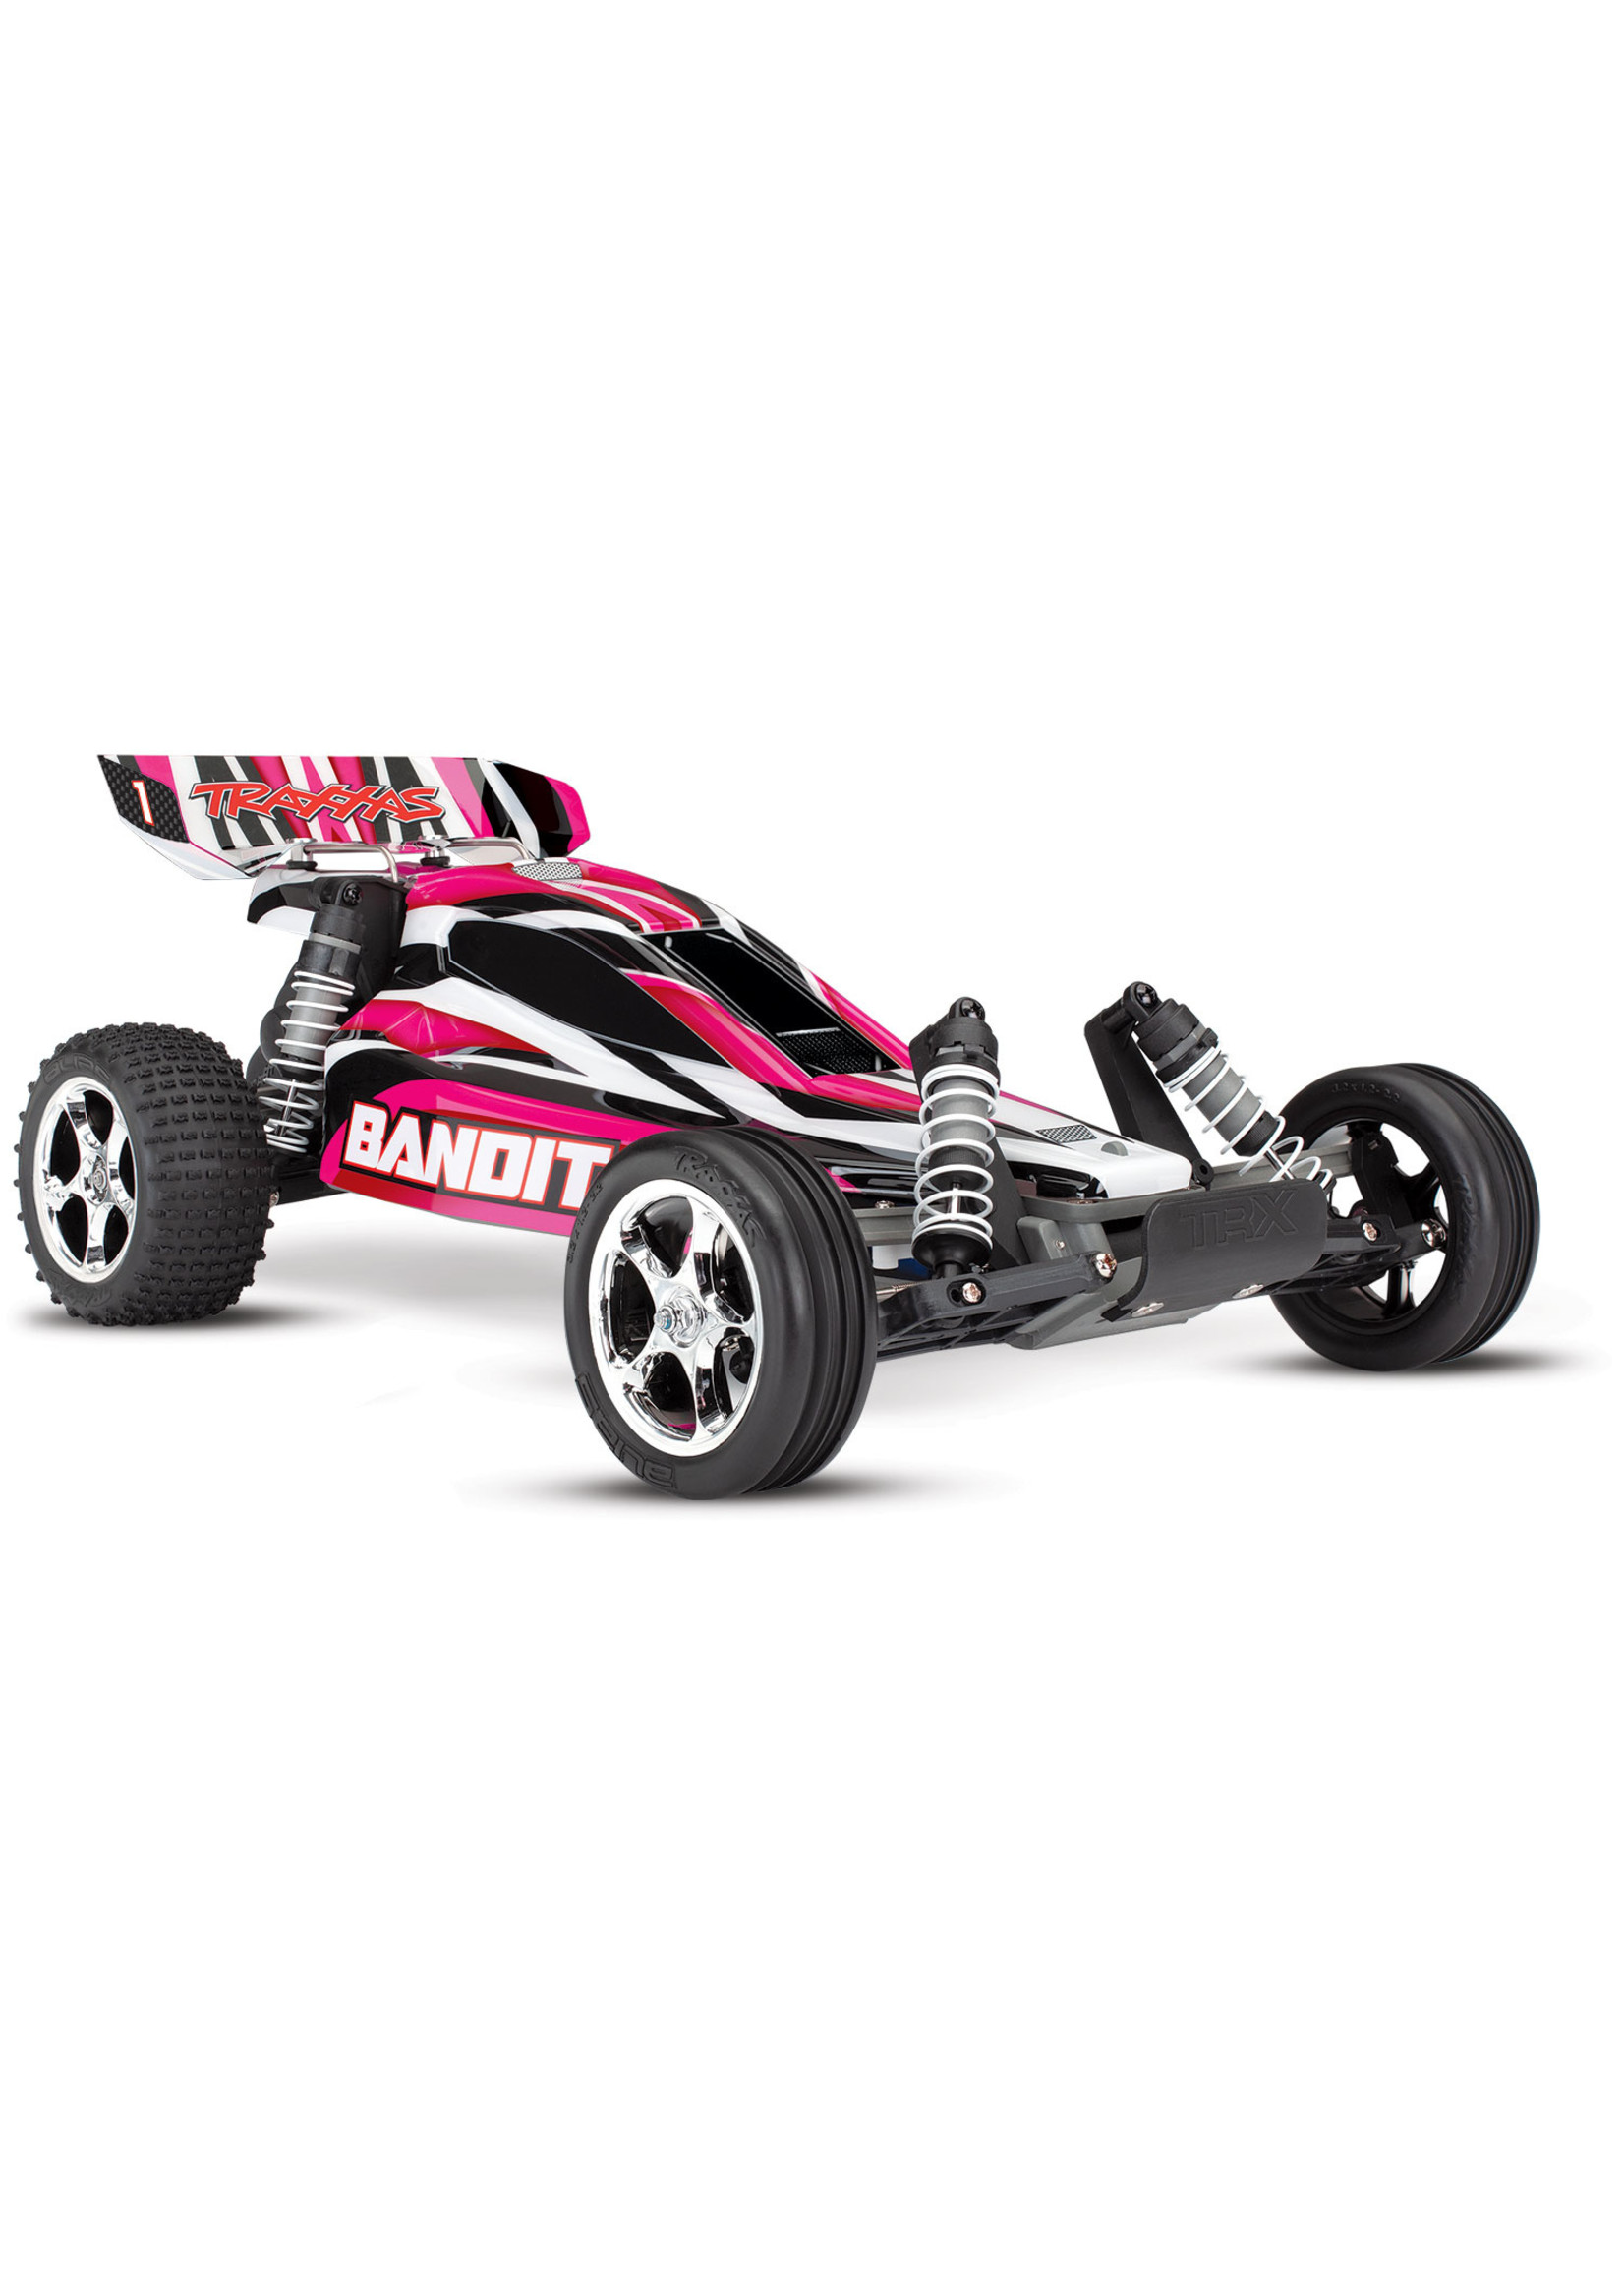 Traxxas 1/10 Bandit XL-5 Extreme Sport Electric Buggy RTR - Pink